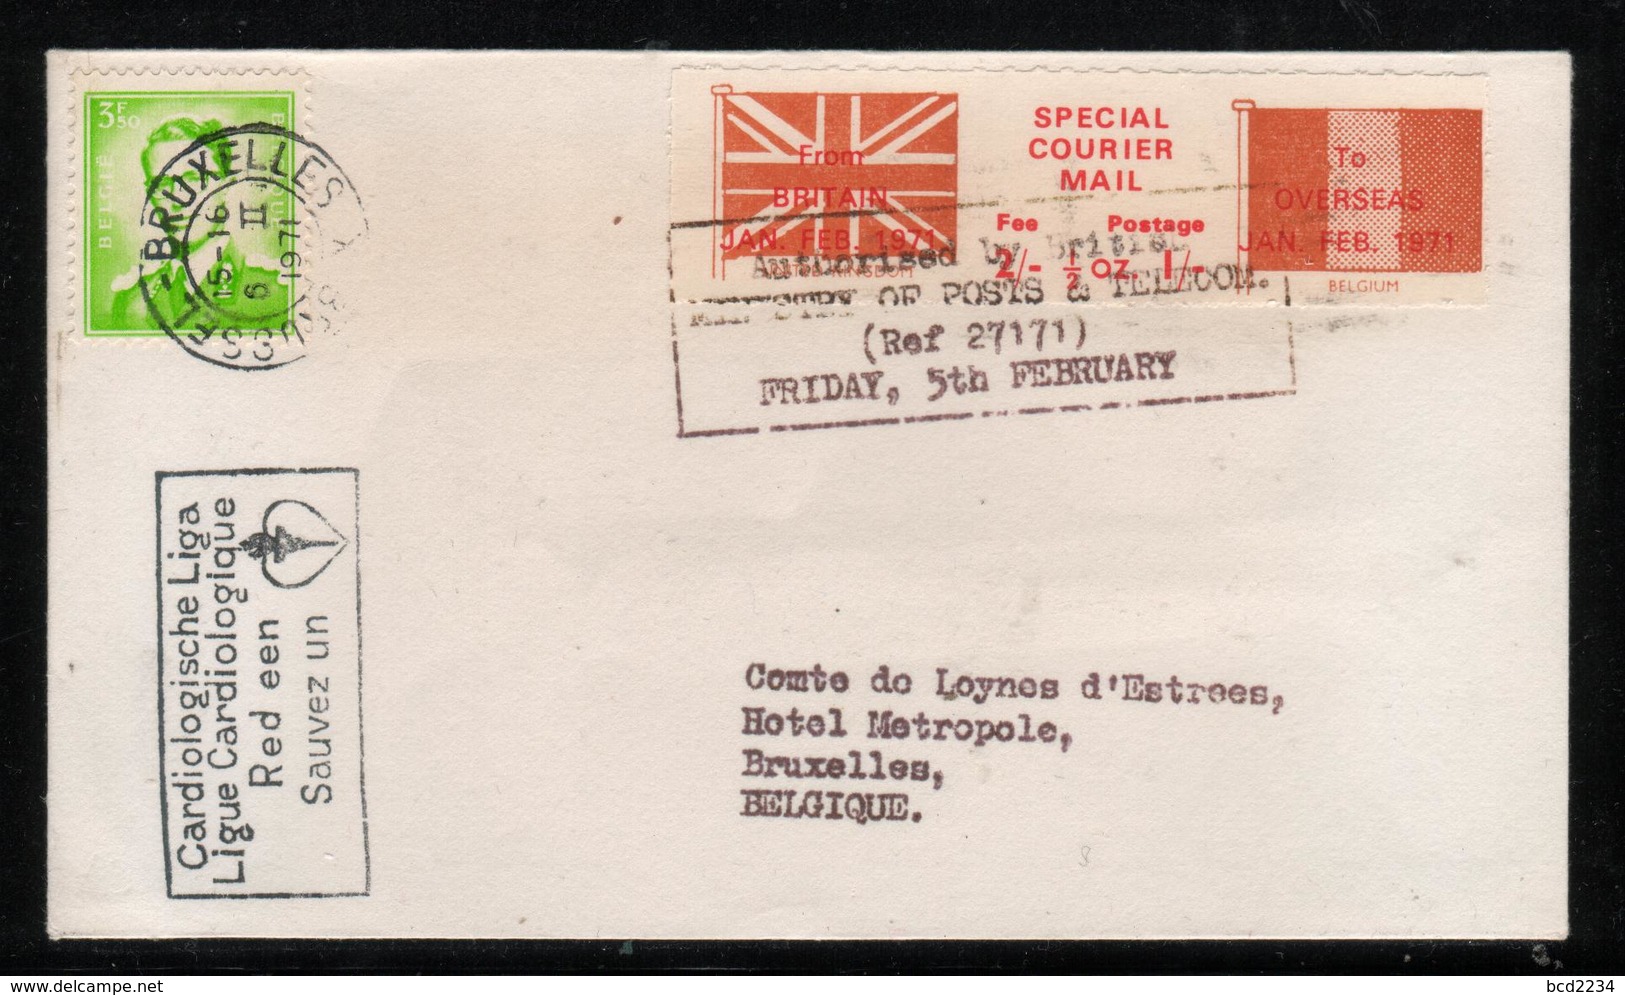 GREAT BRITAIN GB 1971 POSTAL STRIKE MAIL SPECIAL COURIER MAIL 1ST ISSUE PRE-DECIMAL COVER TO BRUSSELS BELGIUM 5 FEBRUARY - Unclassified